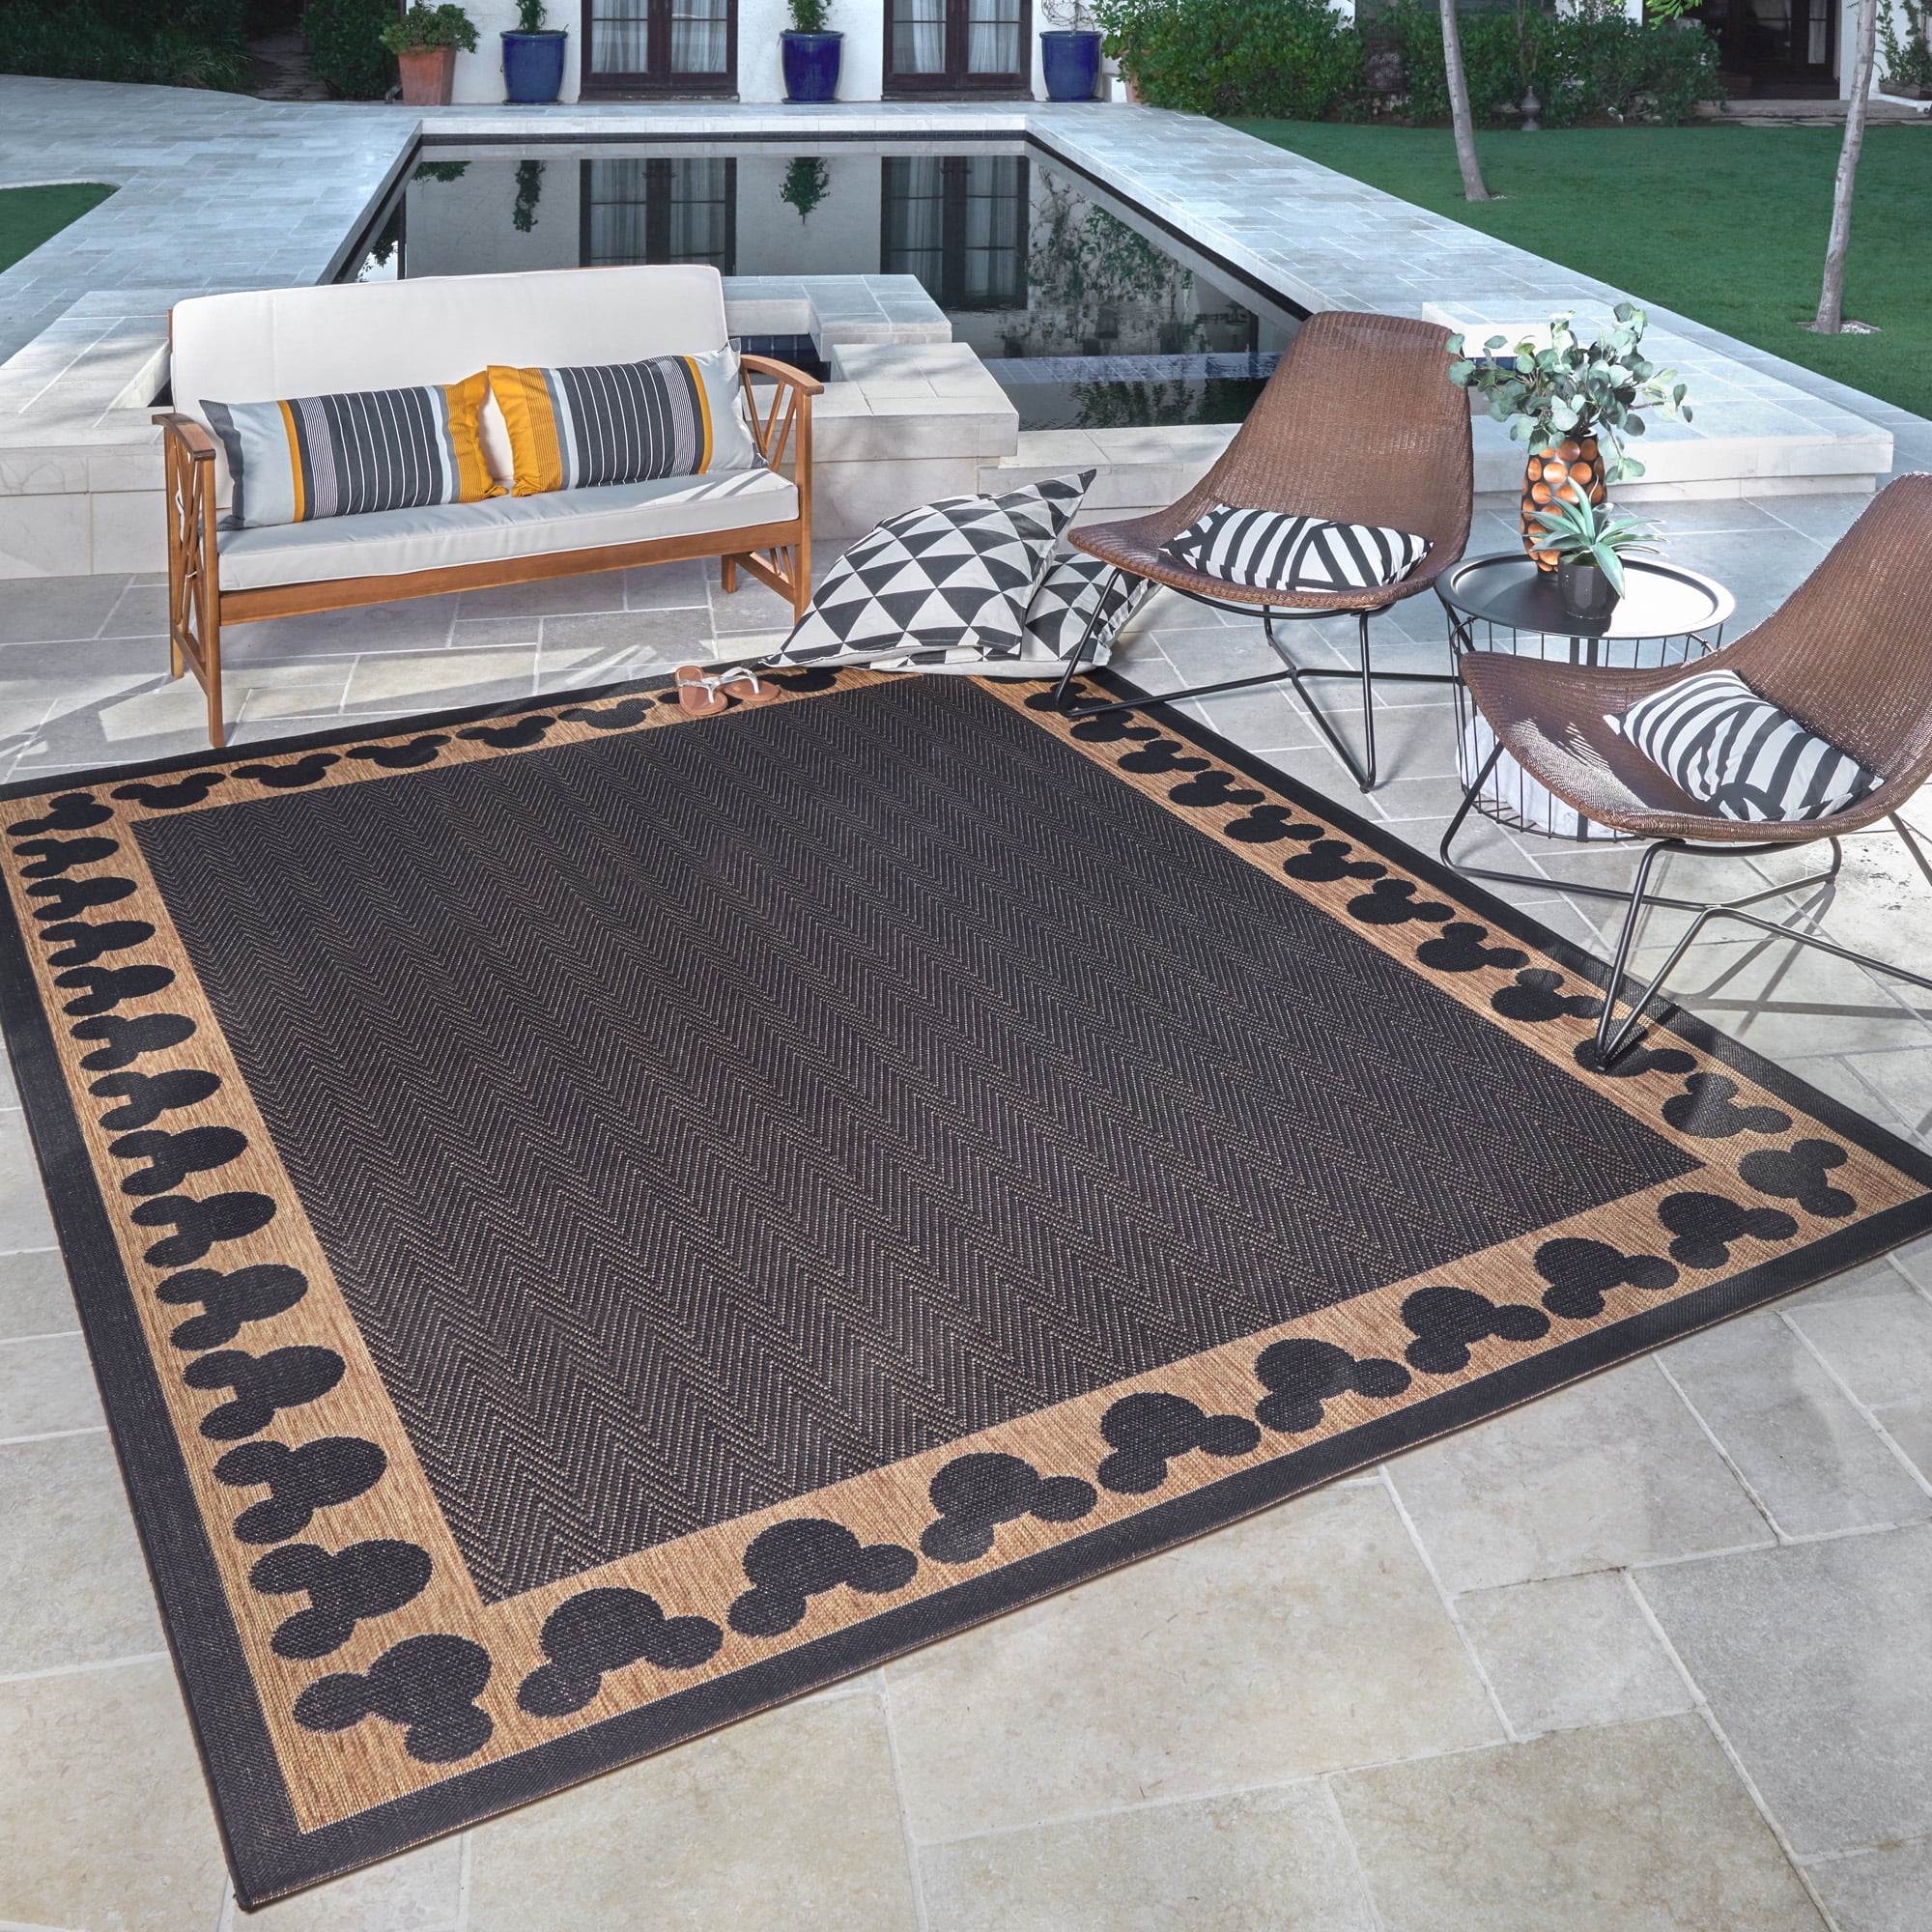 Mickey Mouse Outdoor Rug Border, Mickey Mouse Rugs Carpets